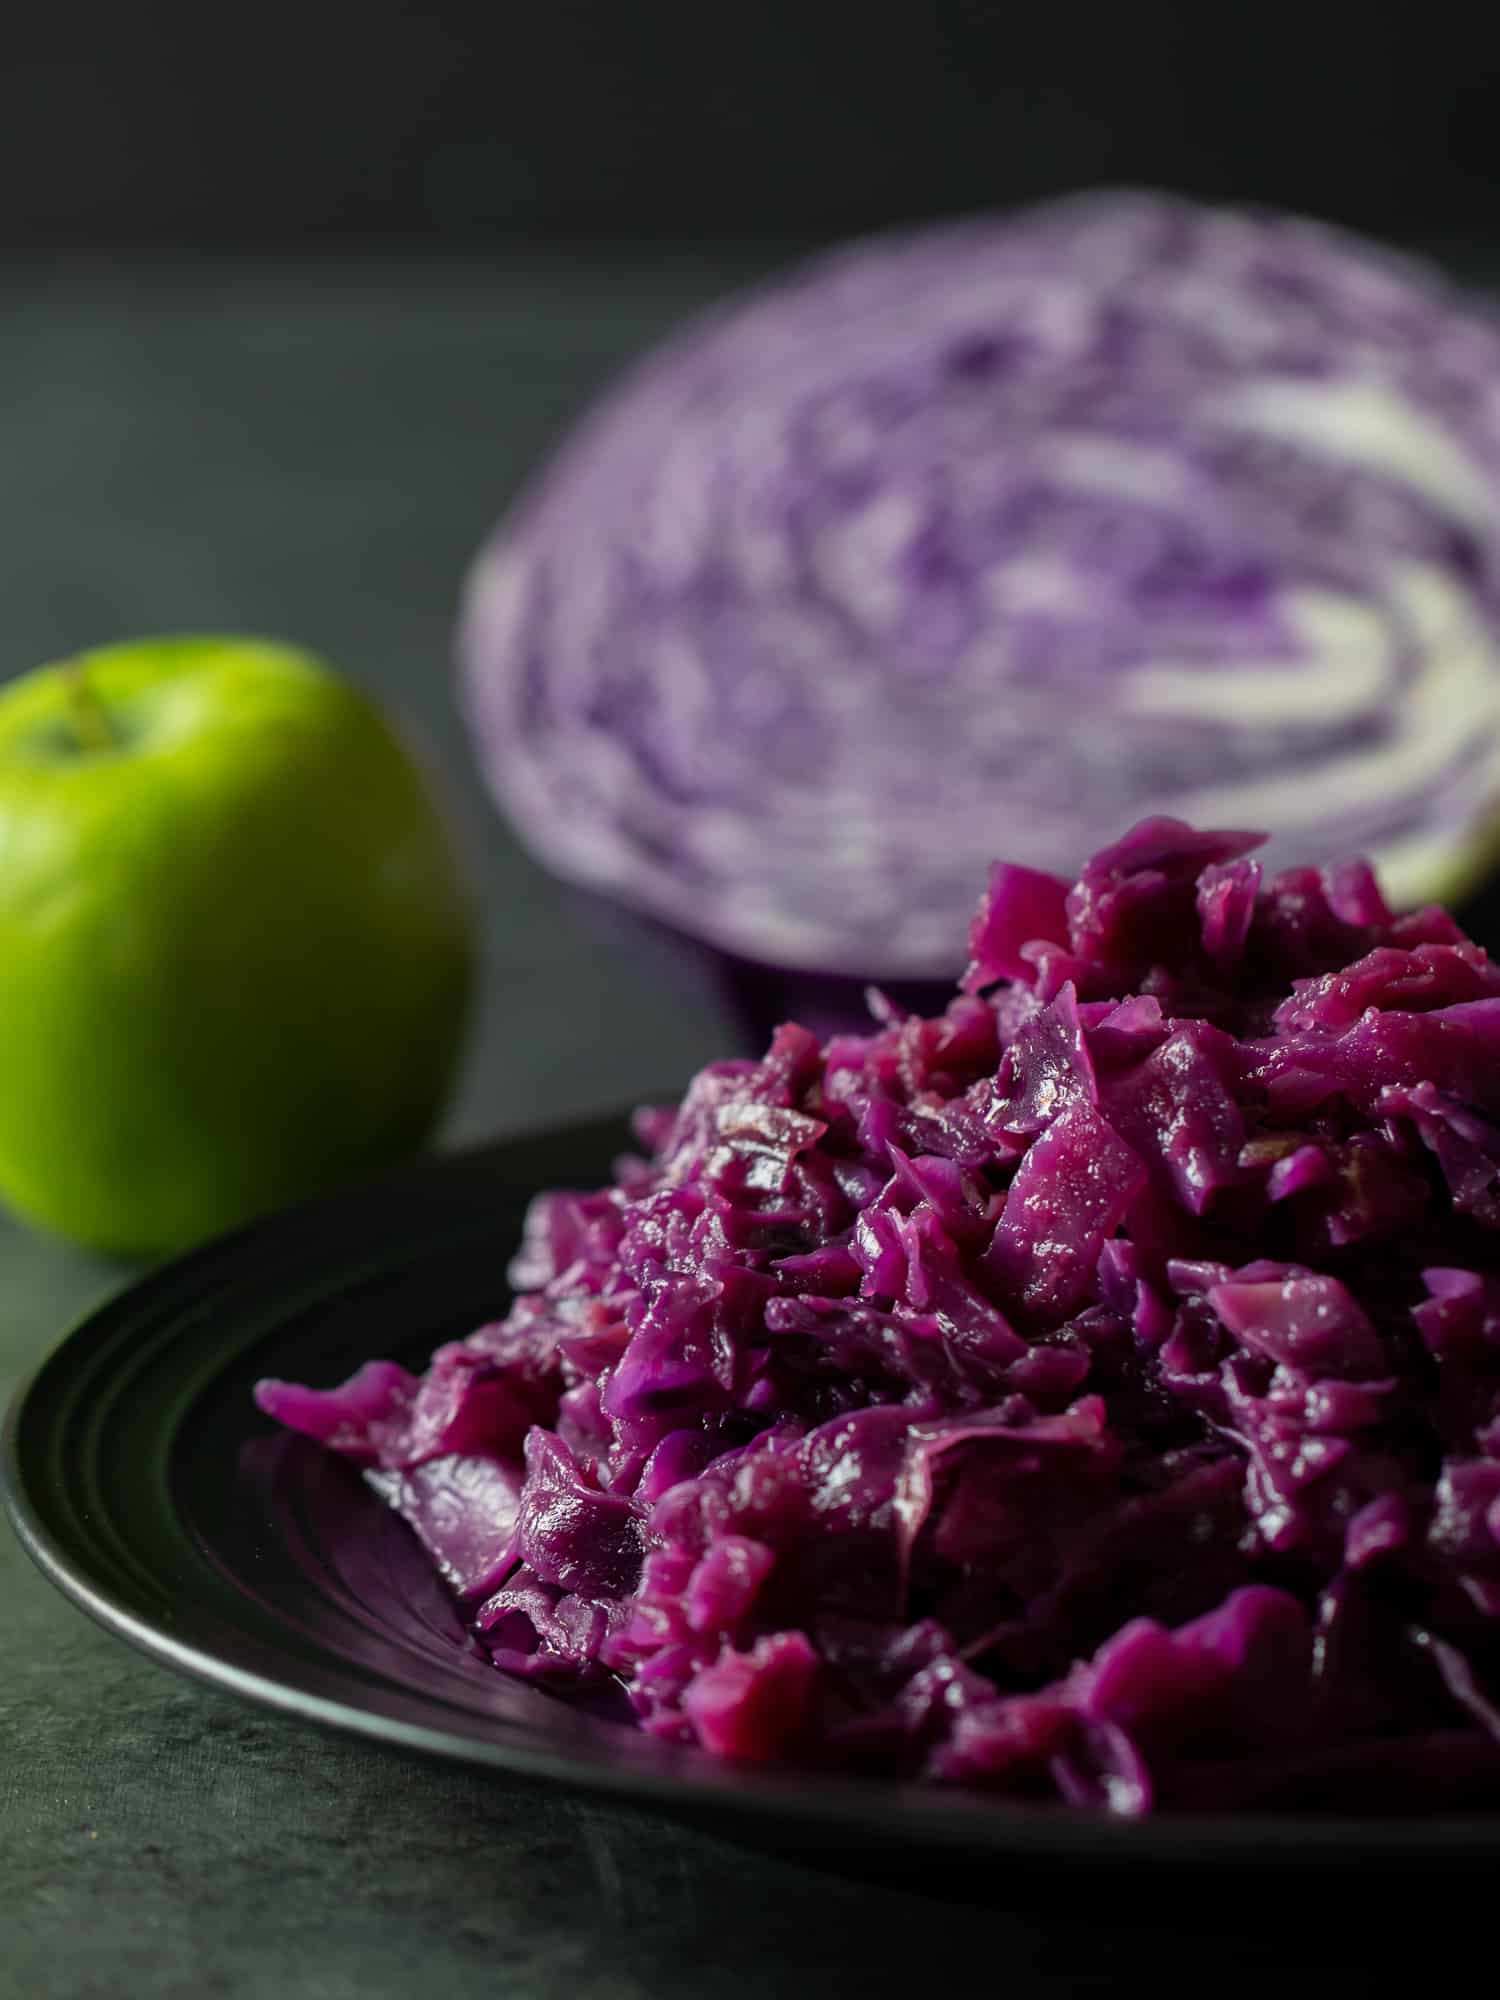 Tall image of a plate of braised red cabbage and apples.